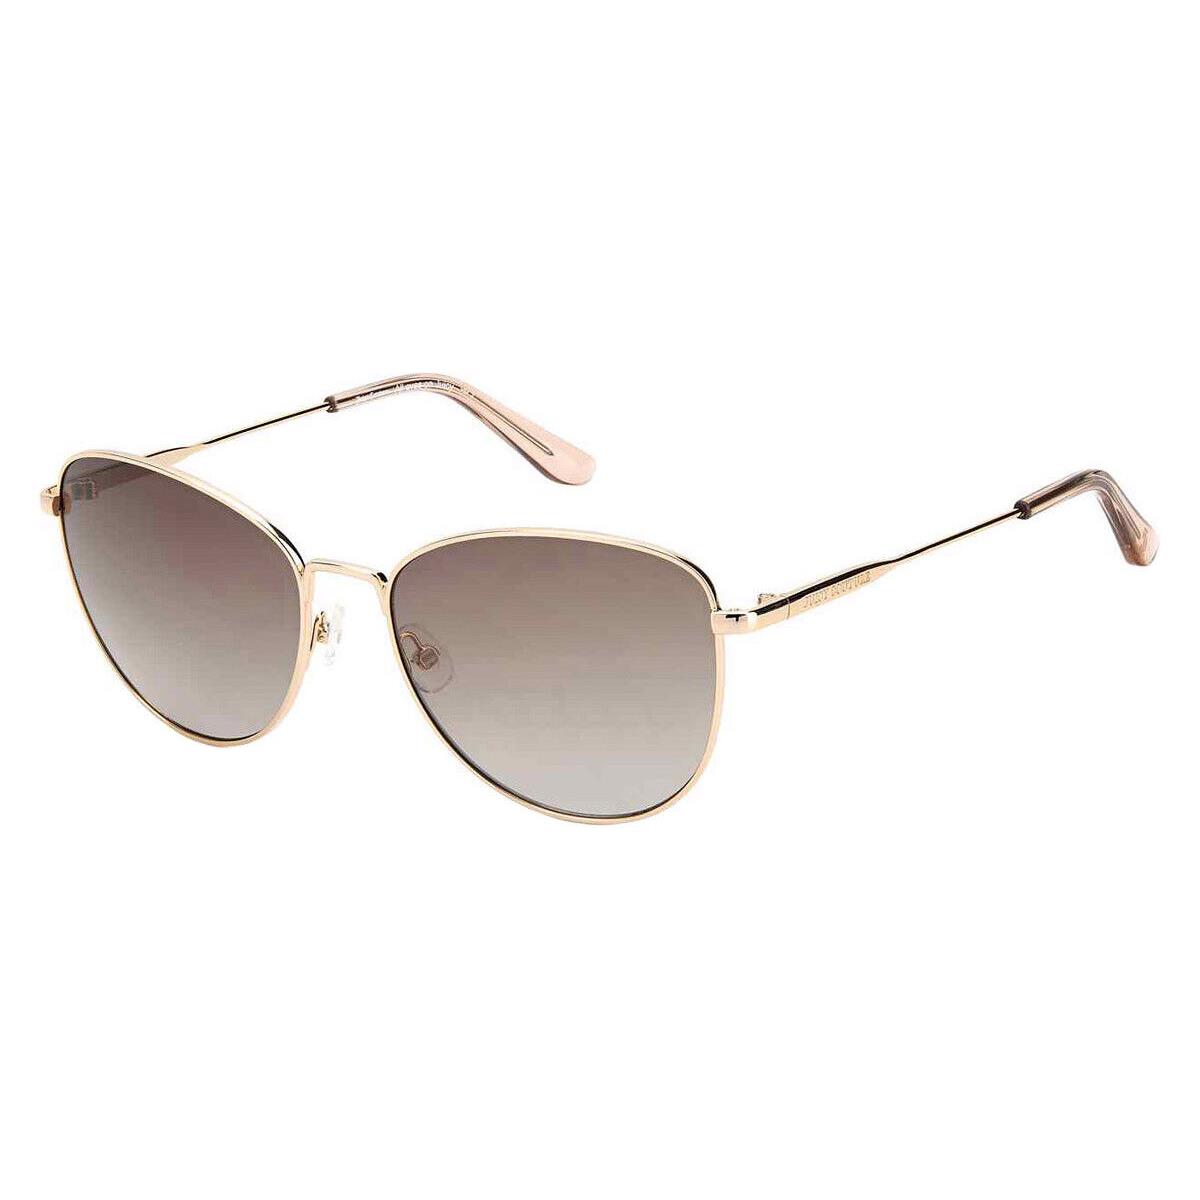 Juicy Couture 620/G/S Sunglasses Oval 57mm